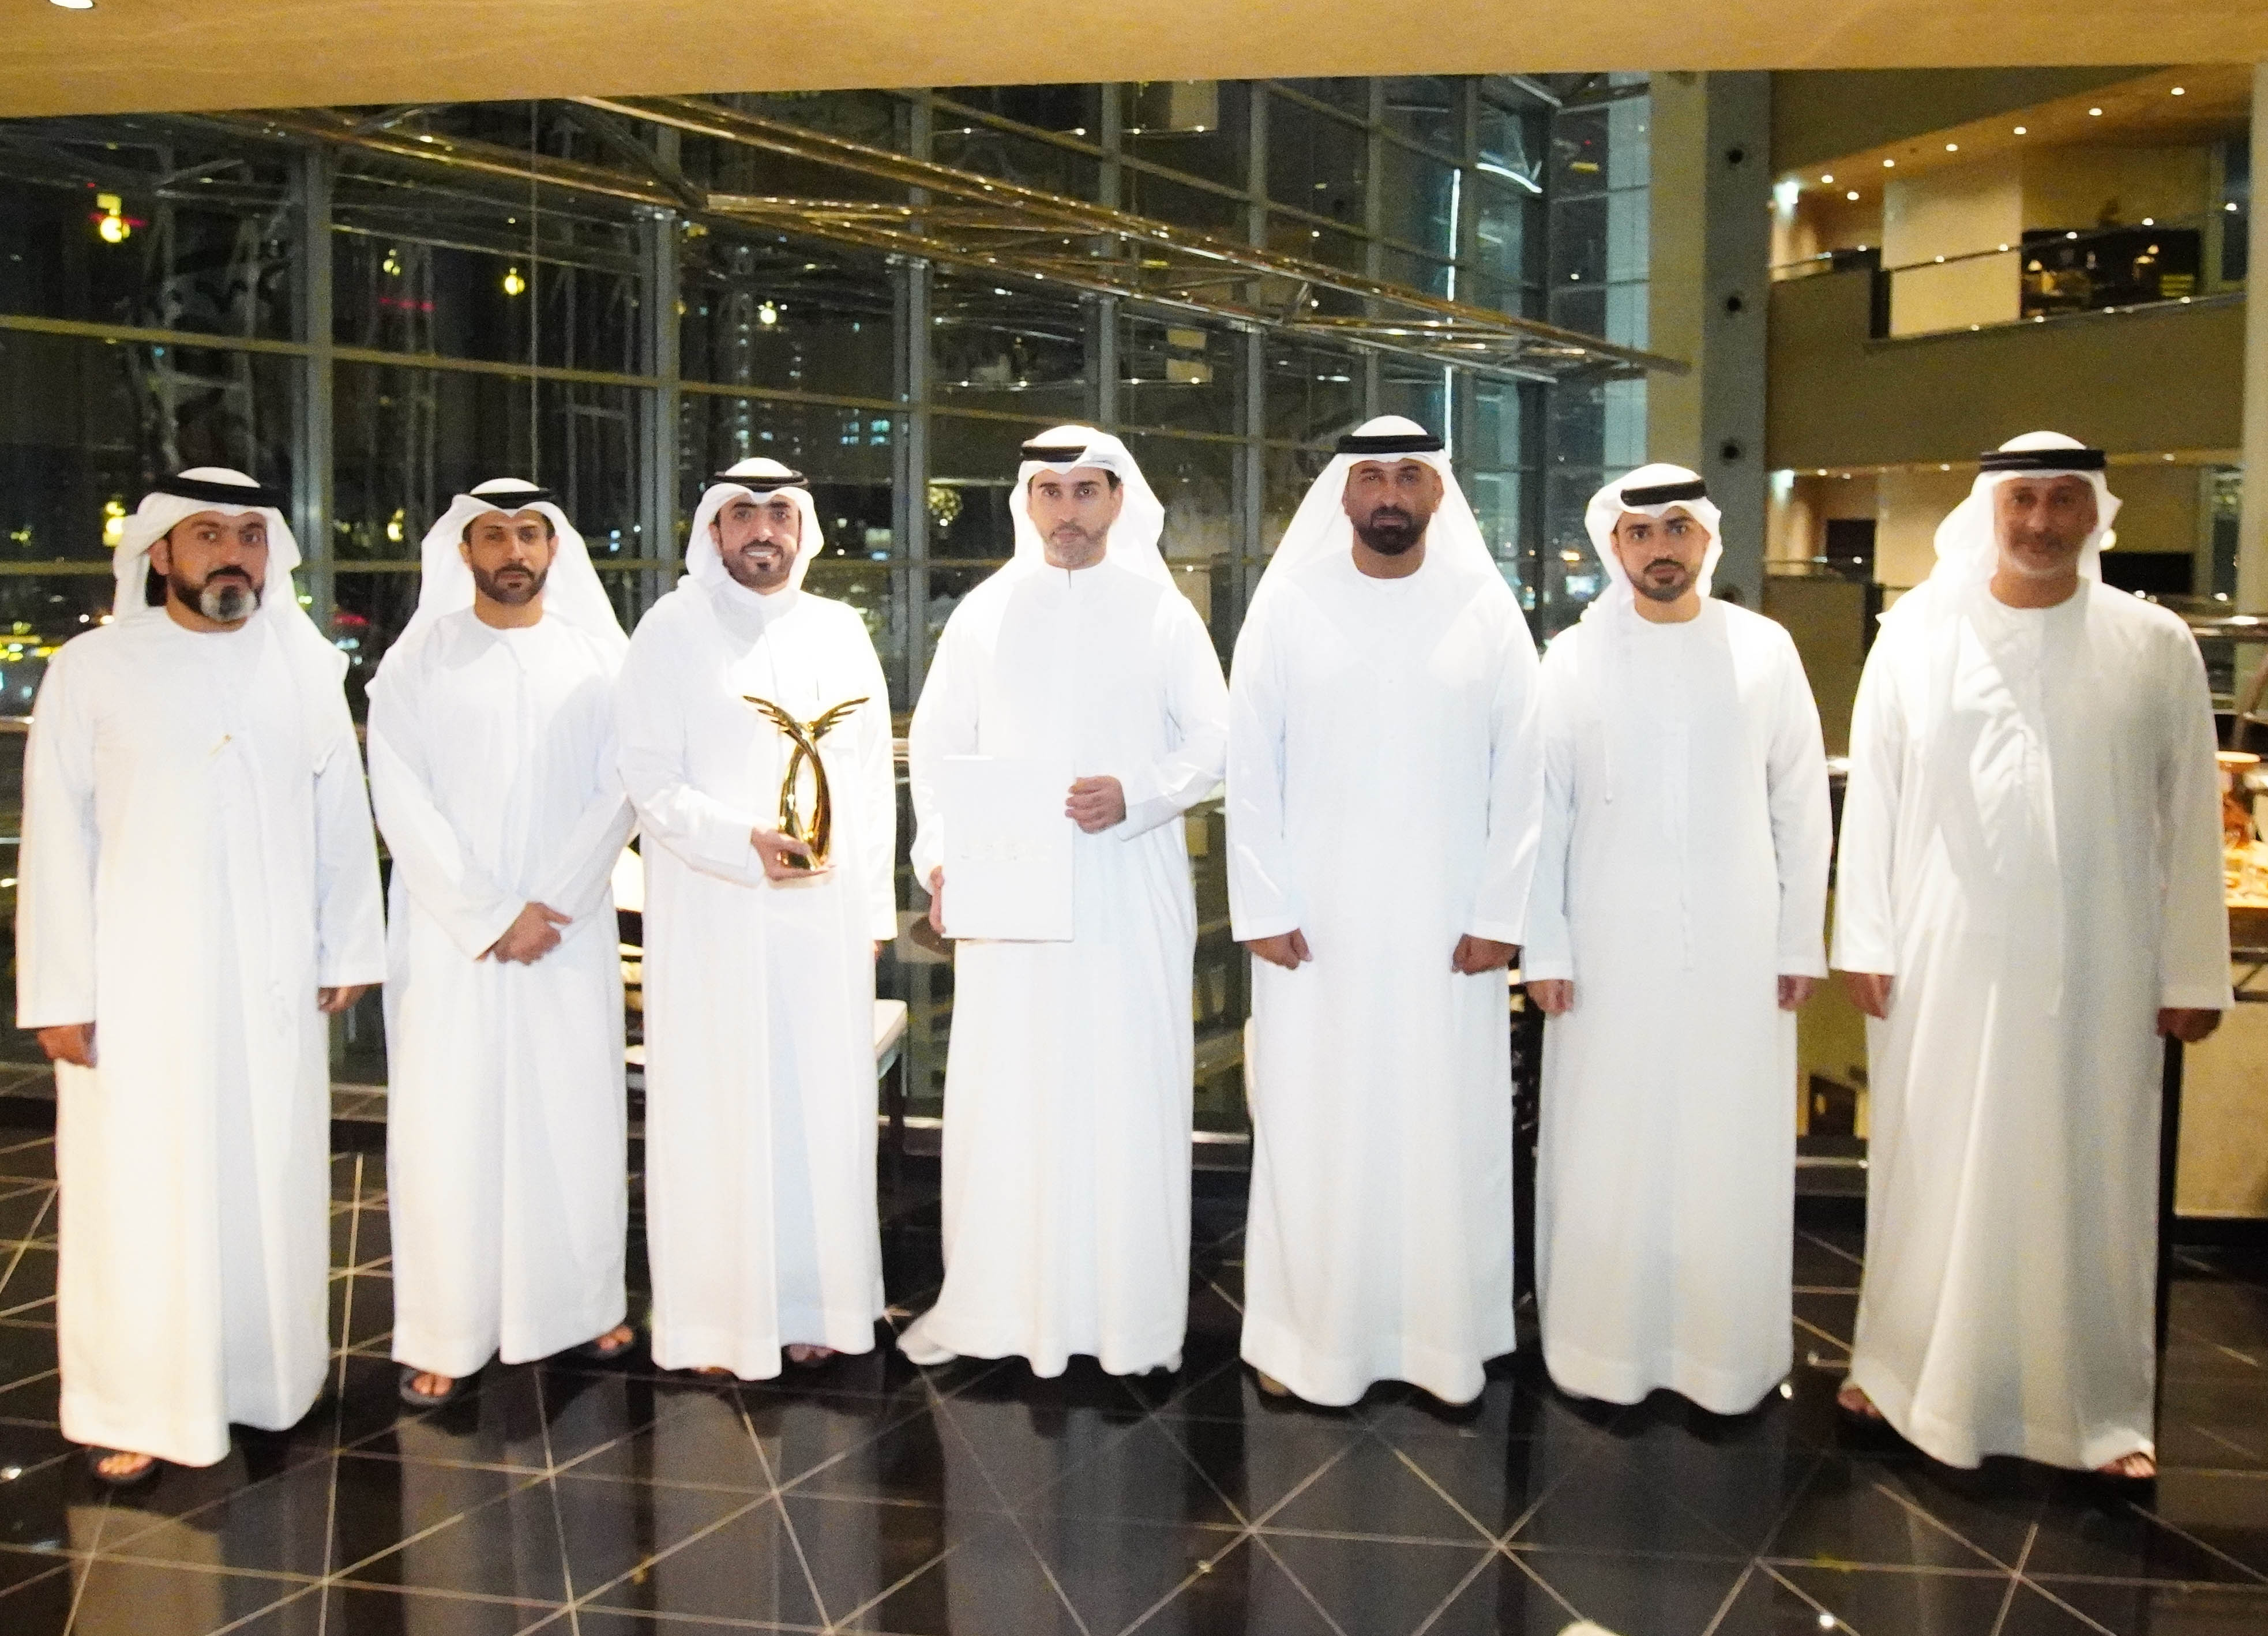 DIMC Board of Directors wishes success to the Victory Team in Kuwait